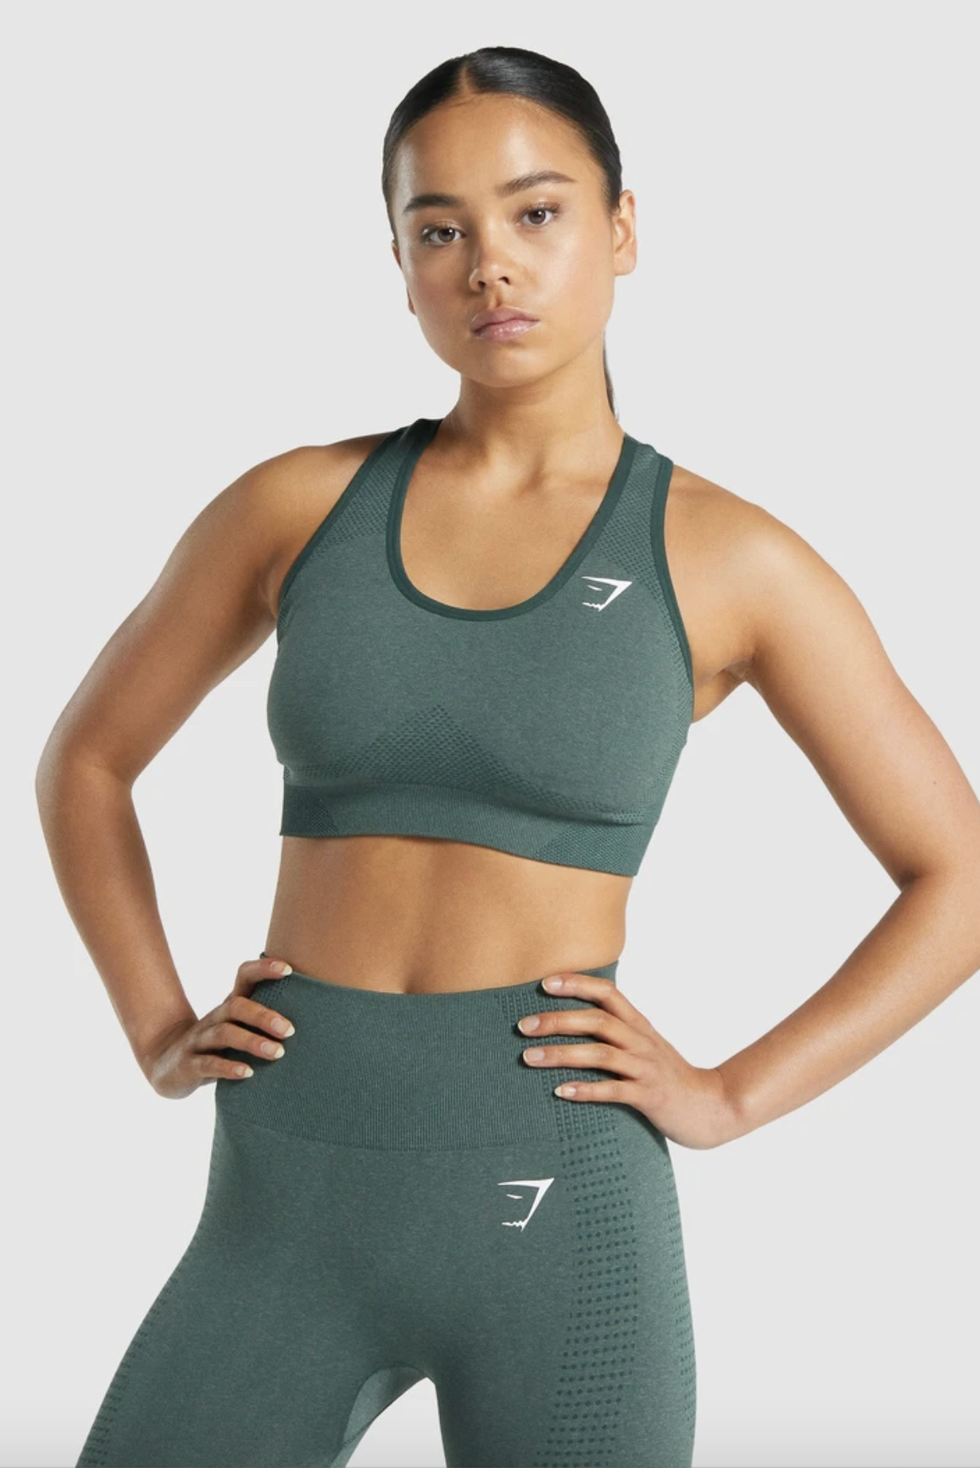 Workout Clothes: How to Pick the Best Fitness Apparel - Society19